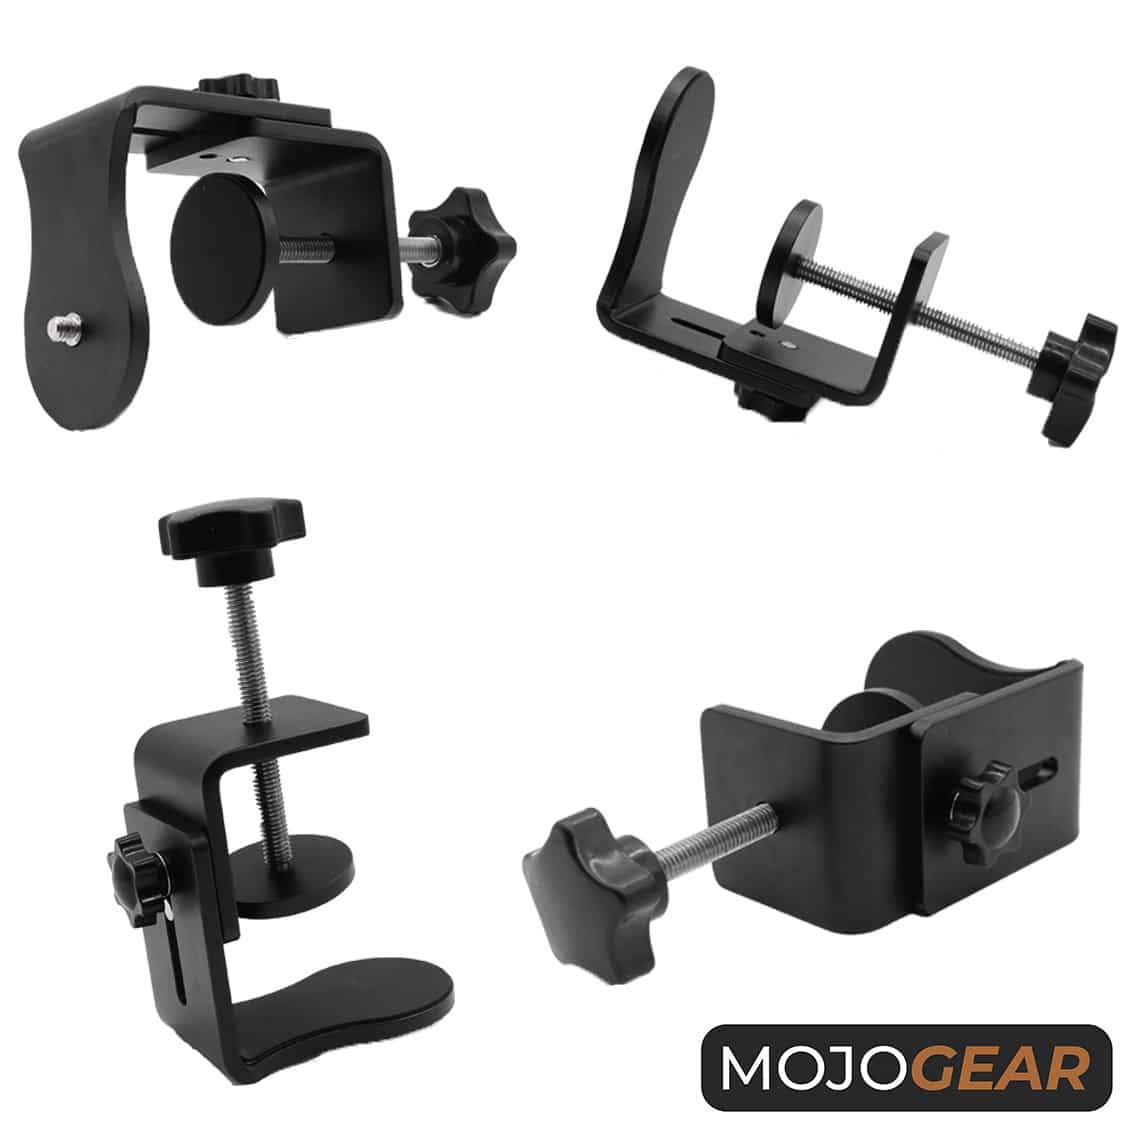 MOJOGEAR Table clamp with 1/4 inch screw - Metal